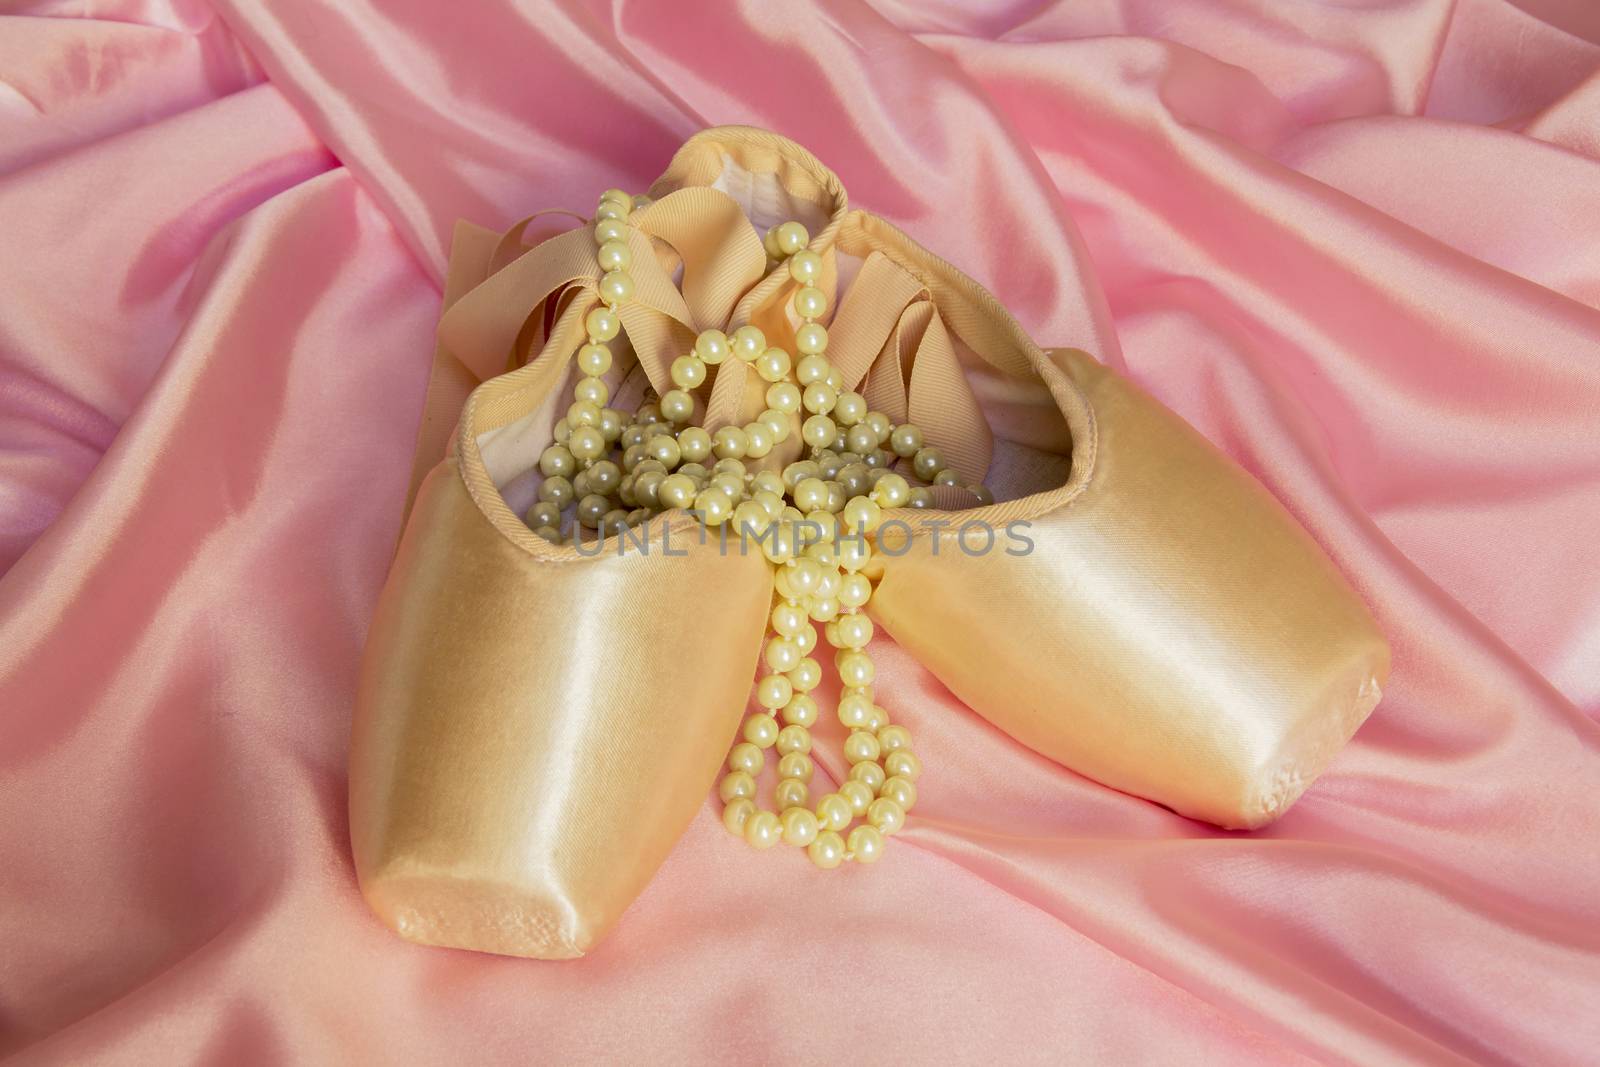 Ballet shoes and Pearl necklace on delicate pink silk background